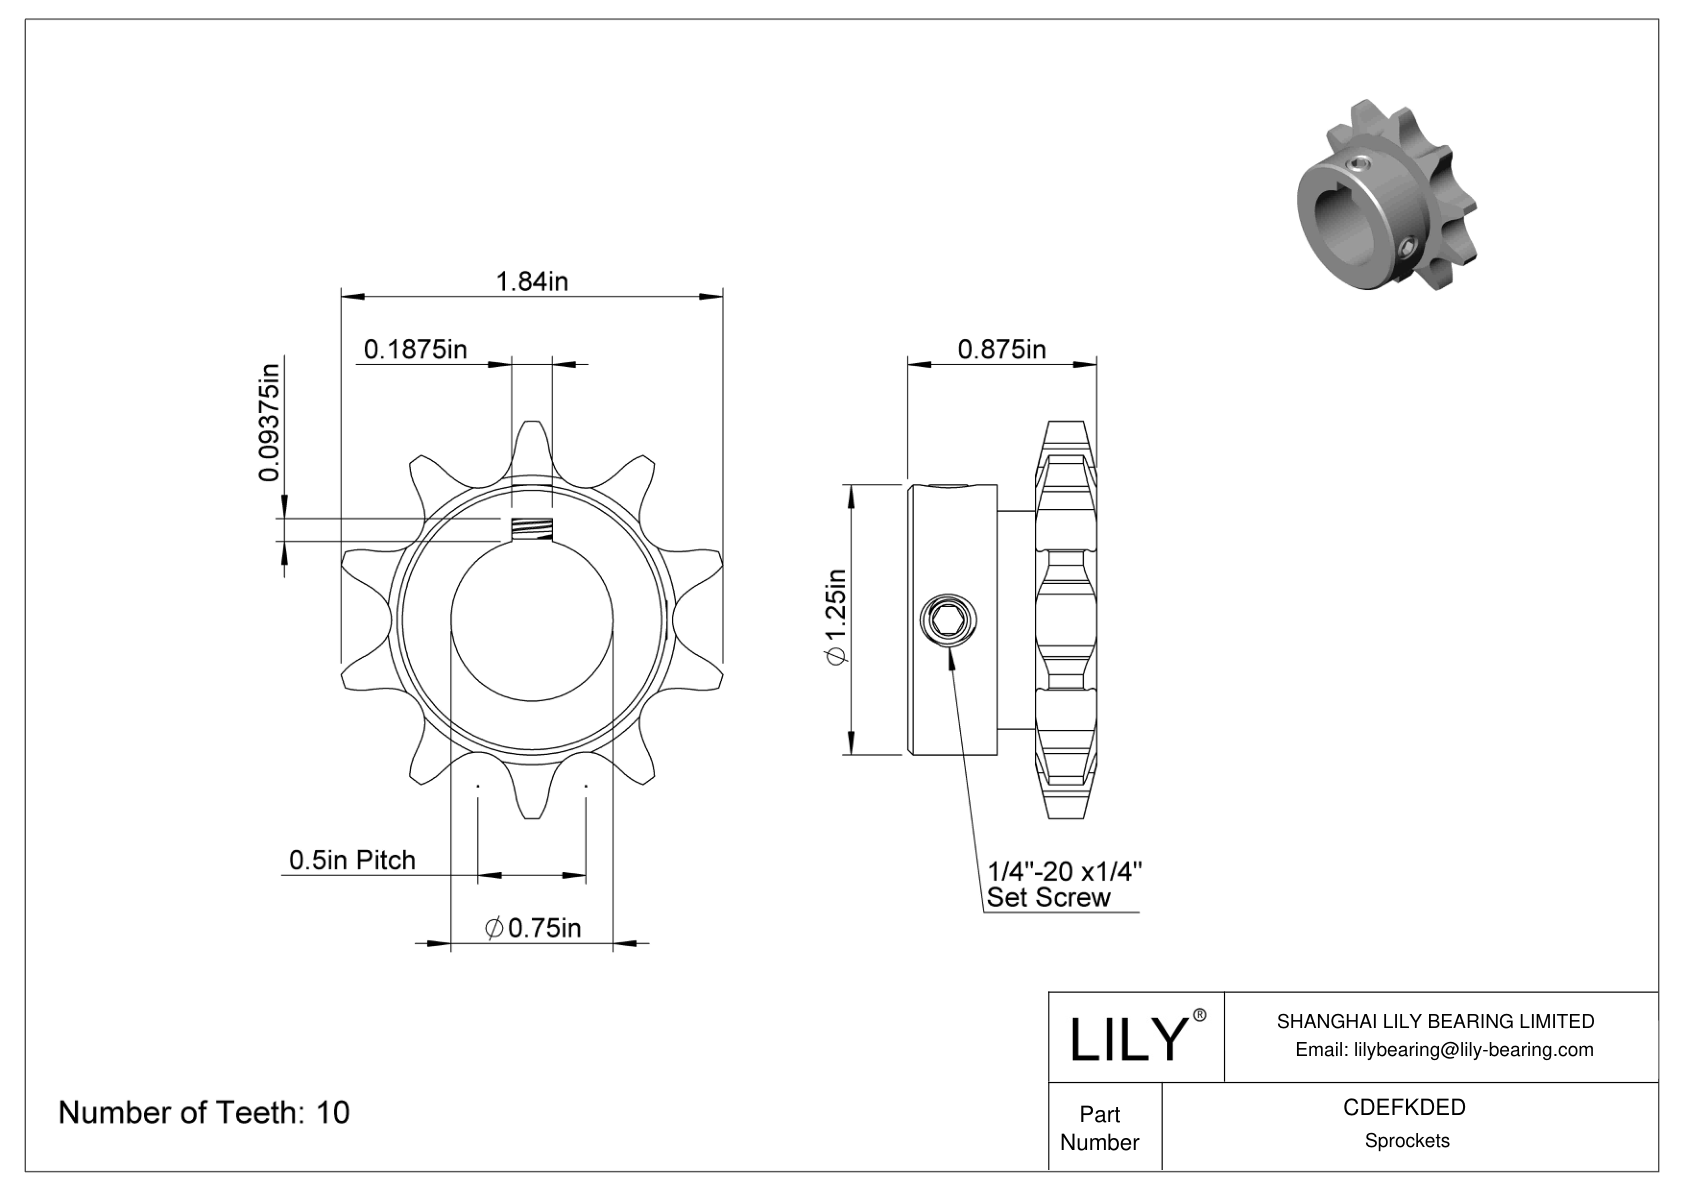 CDEFKDED Corrosion-Resistant Sprockets for ANSI Roller Chain cad drawing